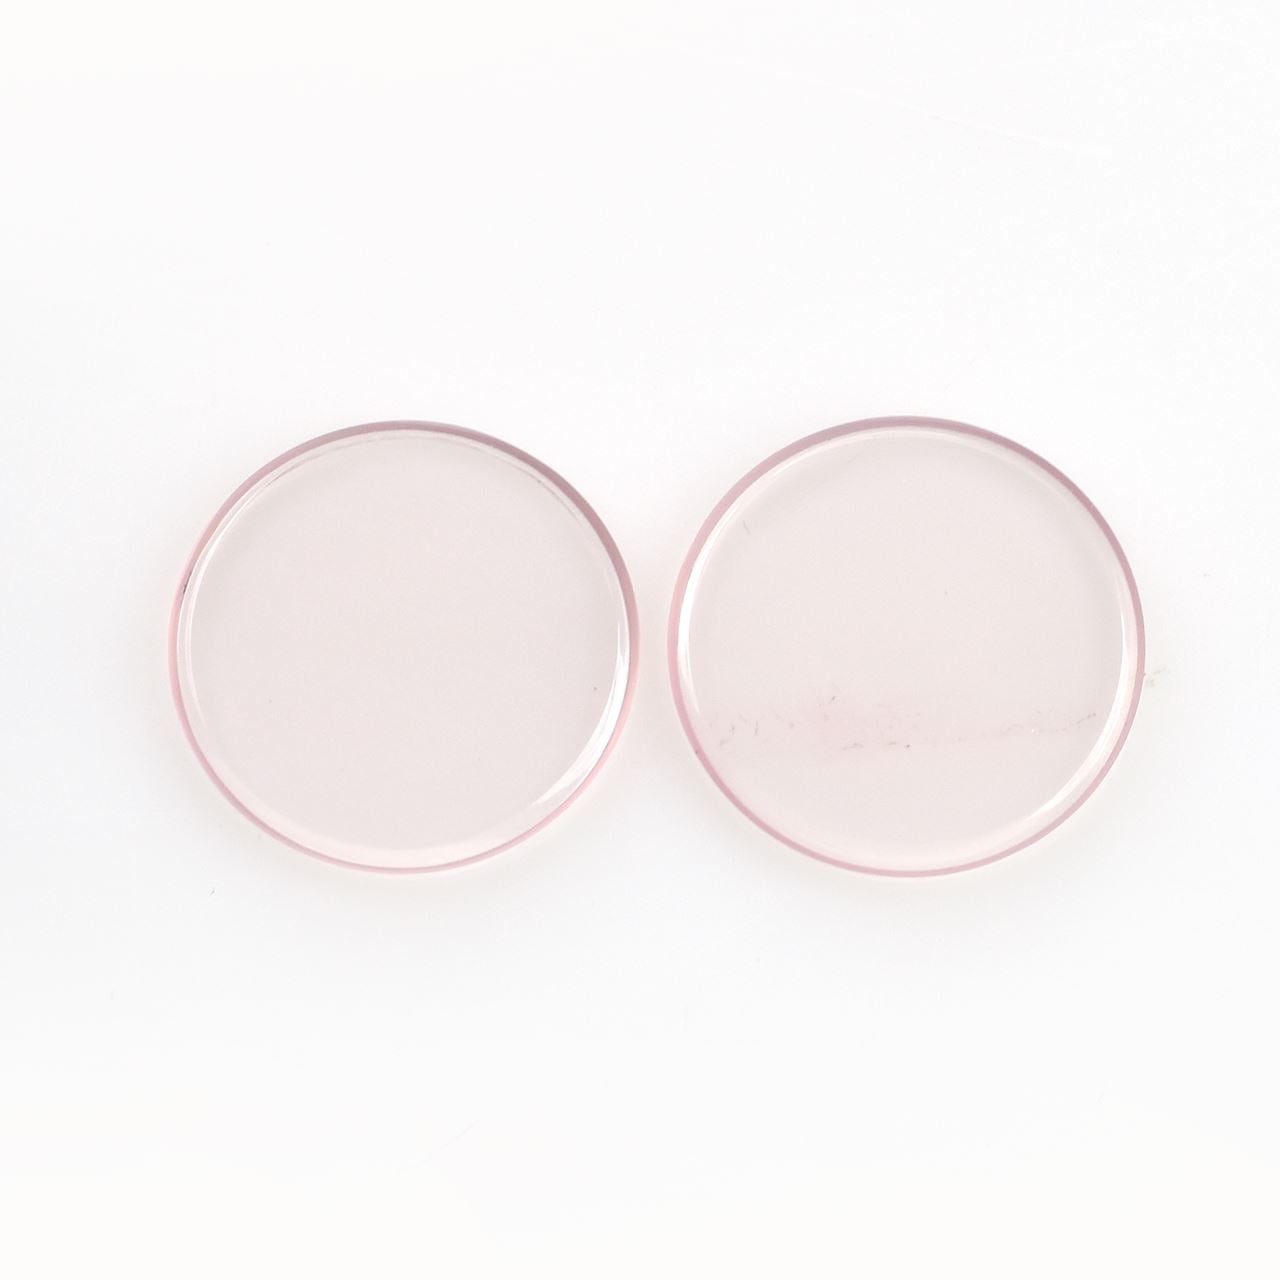 ROSE QUARTZ BOTH SIDE TABLE CUT ROUND (NORMAL/CLEAN)(TRANSPARENT) 20.00X20.00 MM 7.65 Cts.